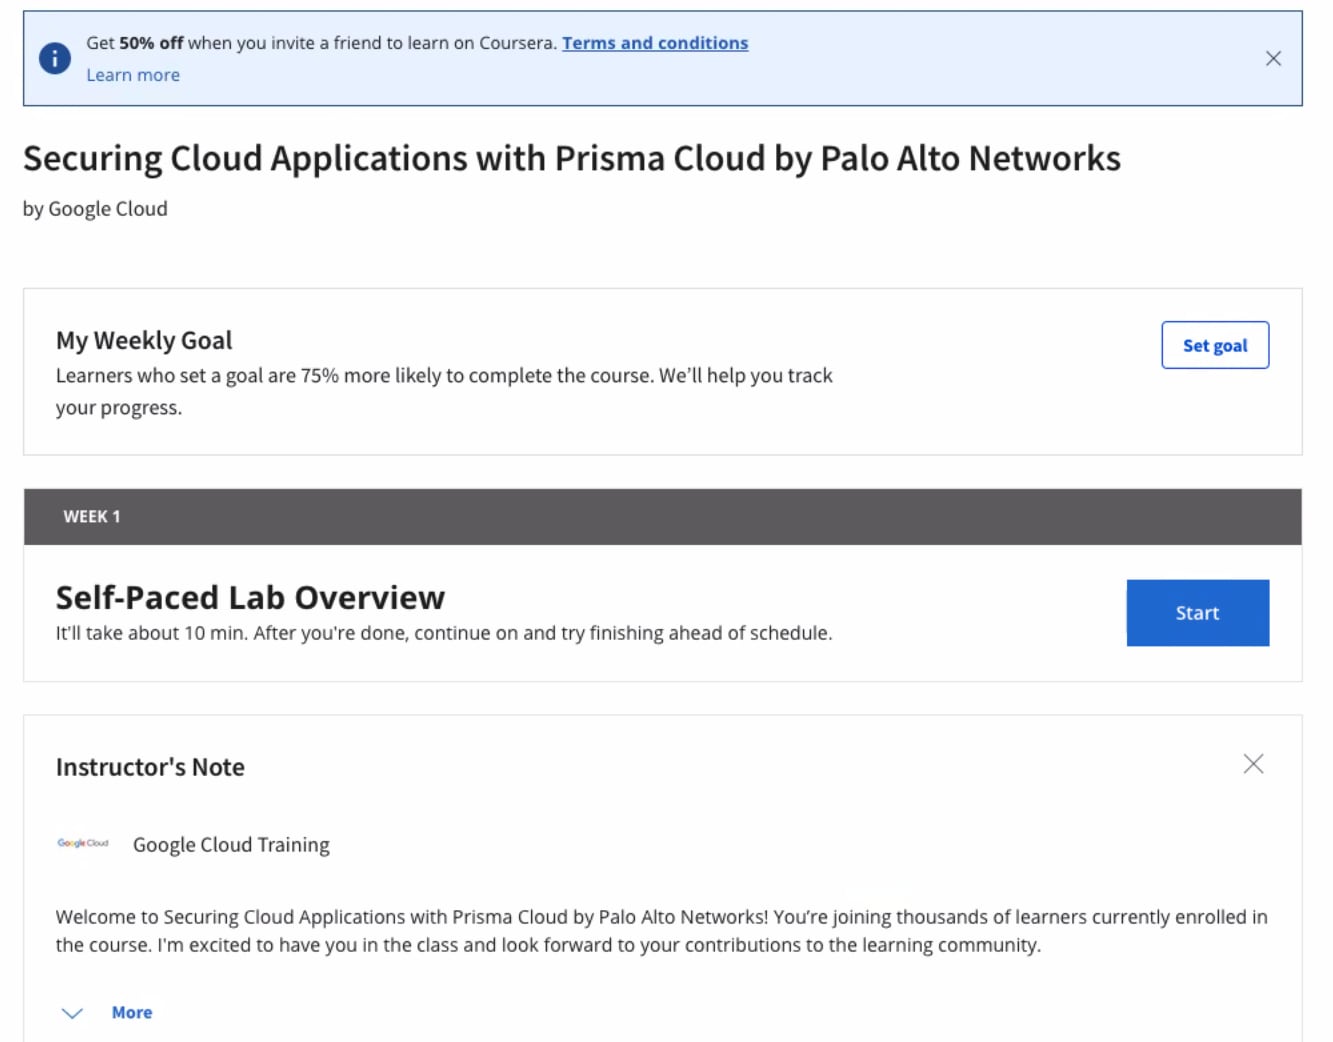 Once you log into Coursera, select the Prisma Cloud course and start your journey